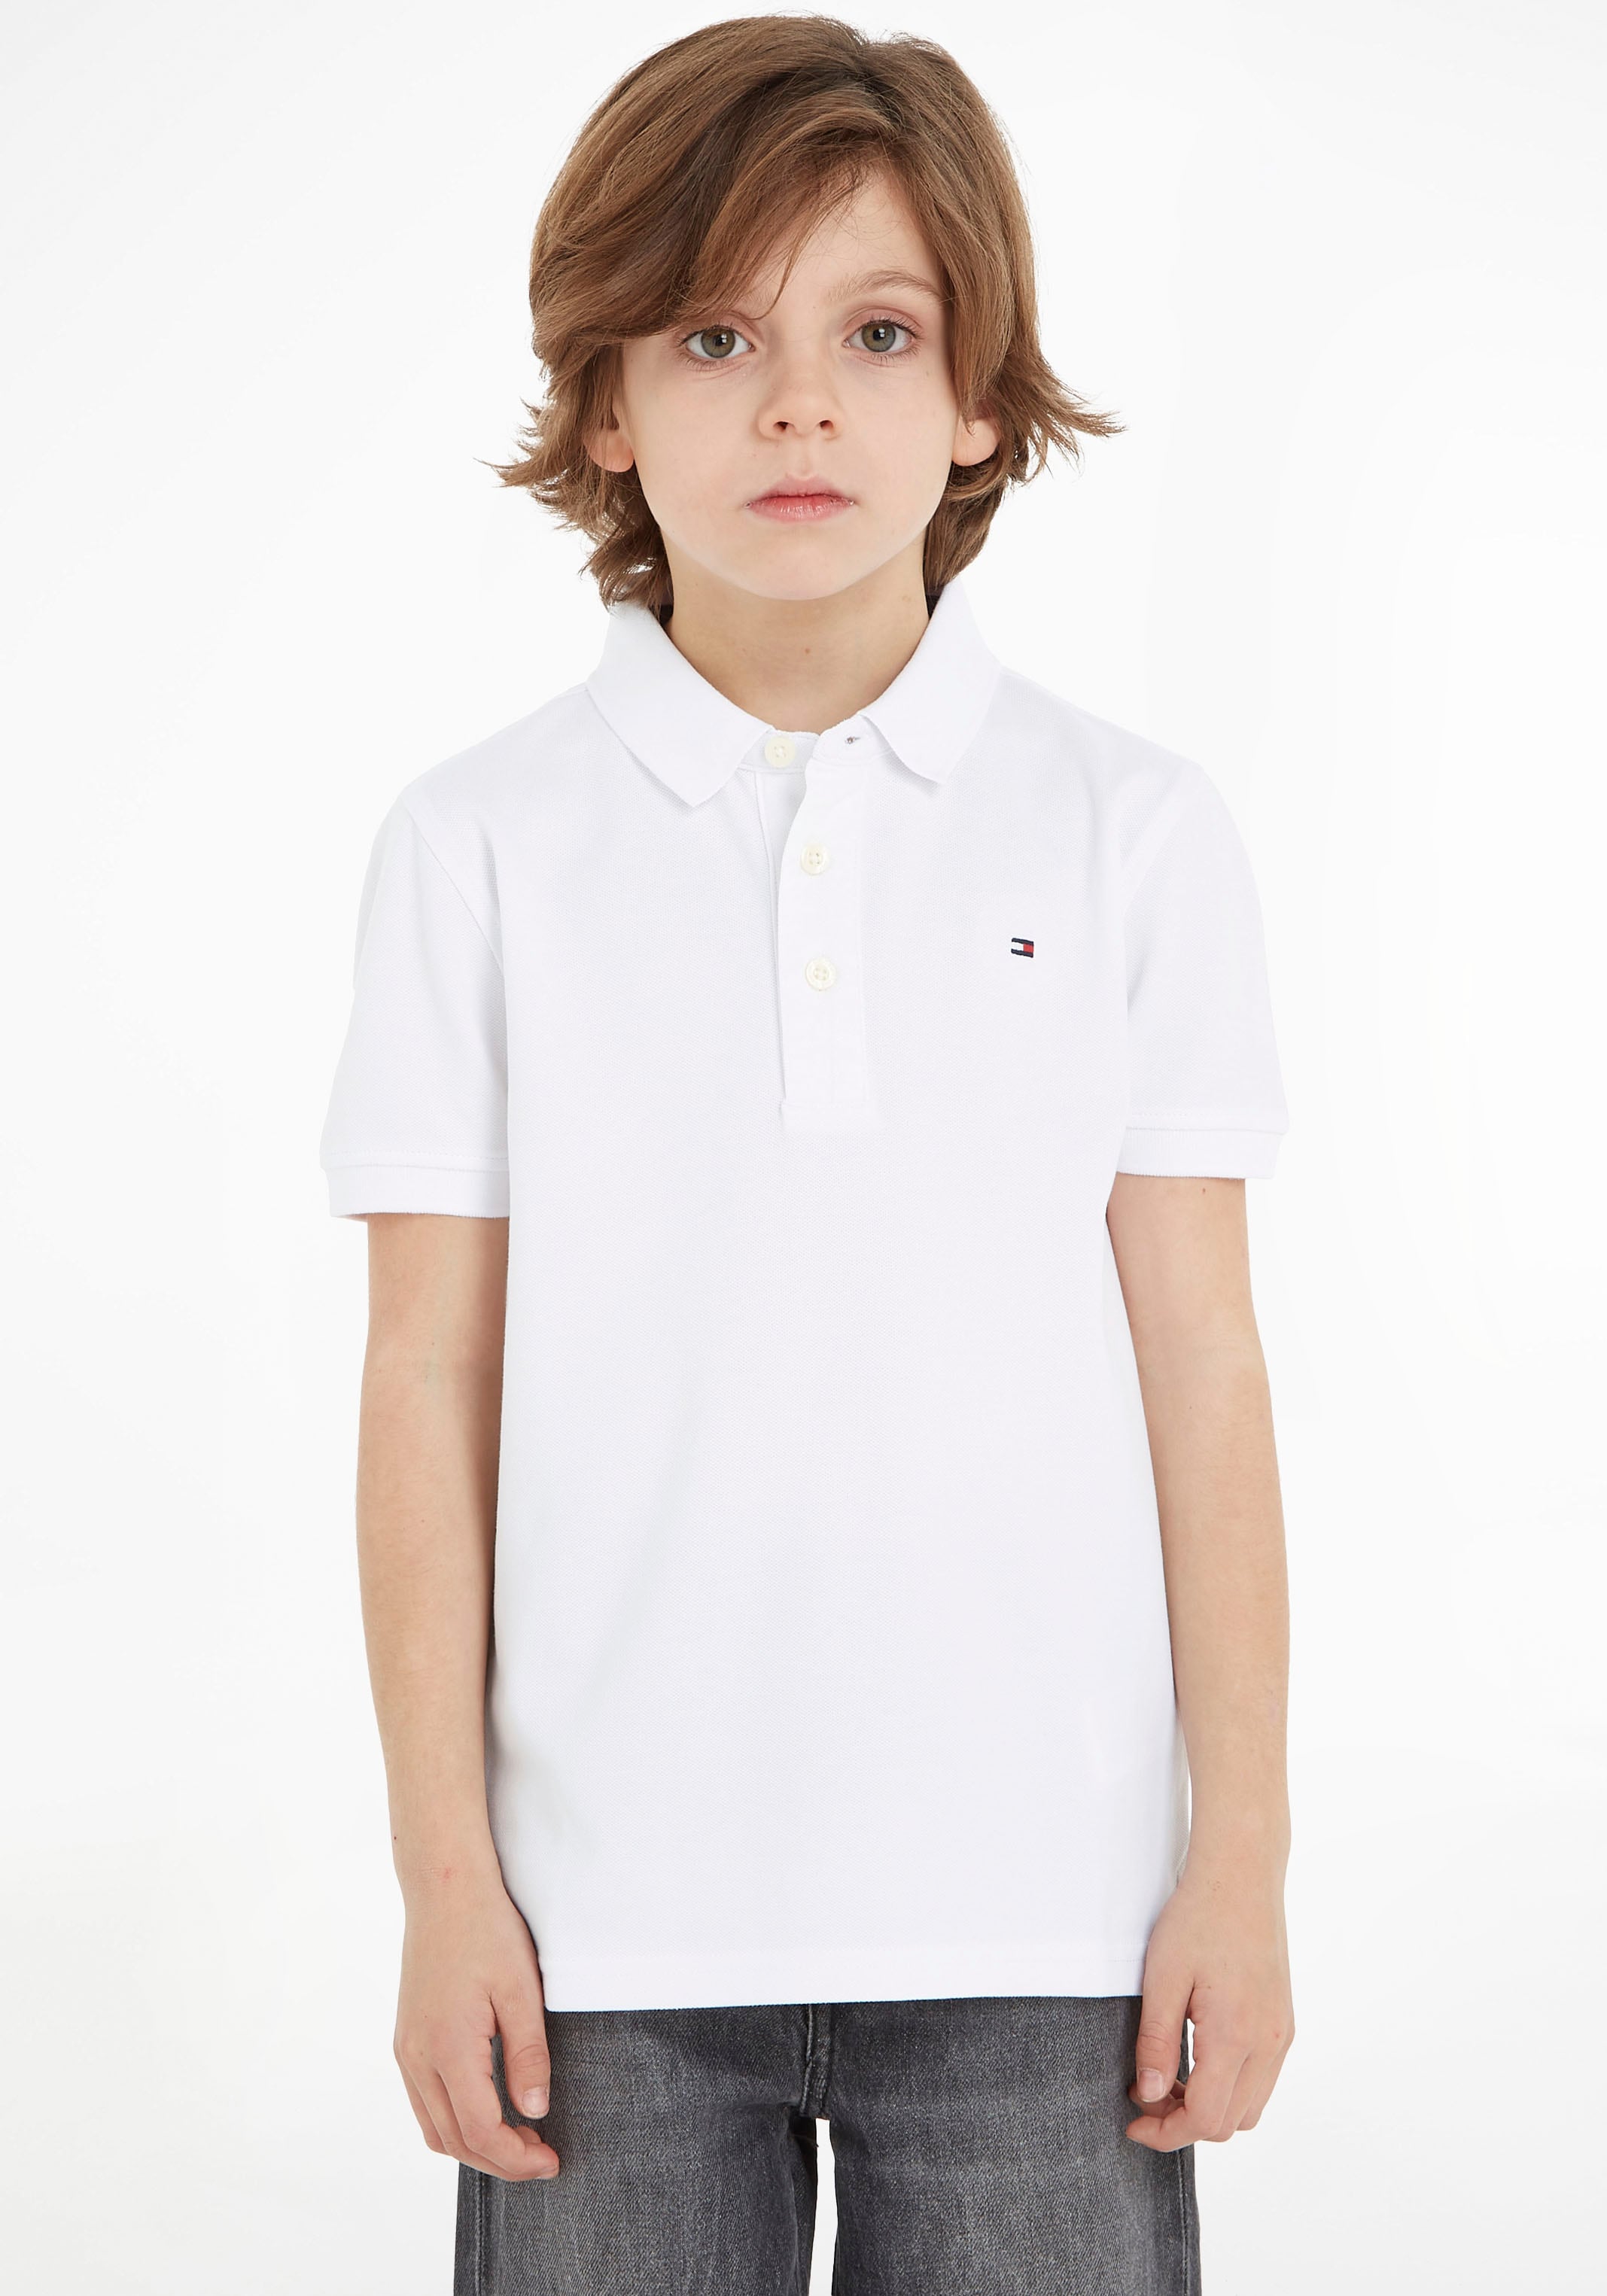 Tommy Hilfiger Polo Shirt For Men's